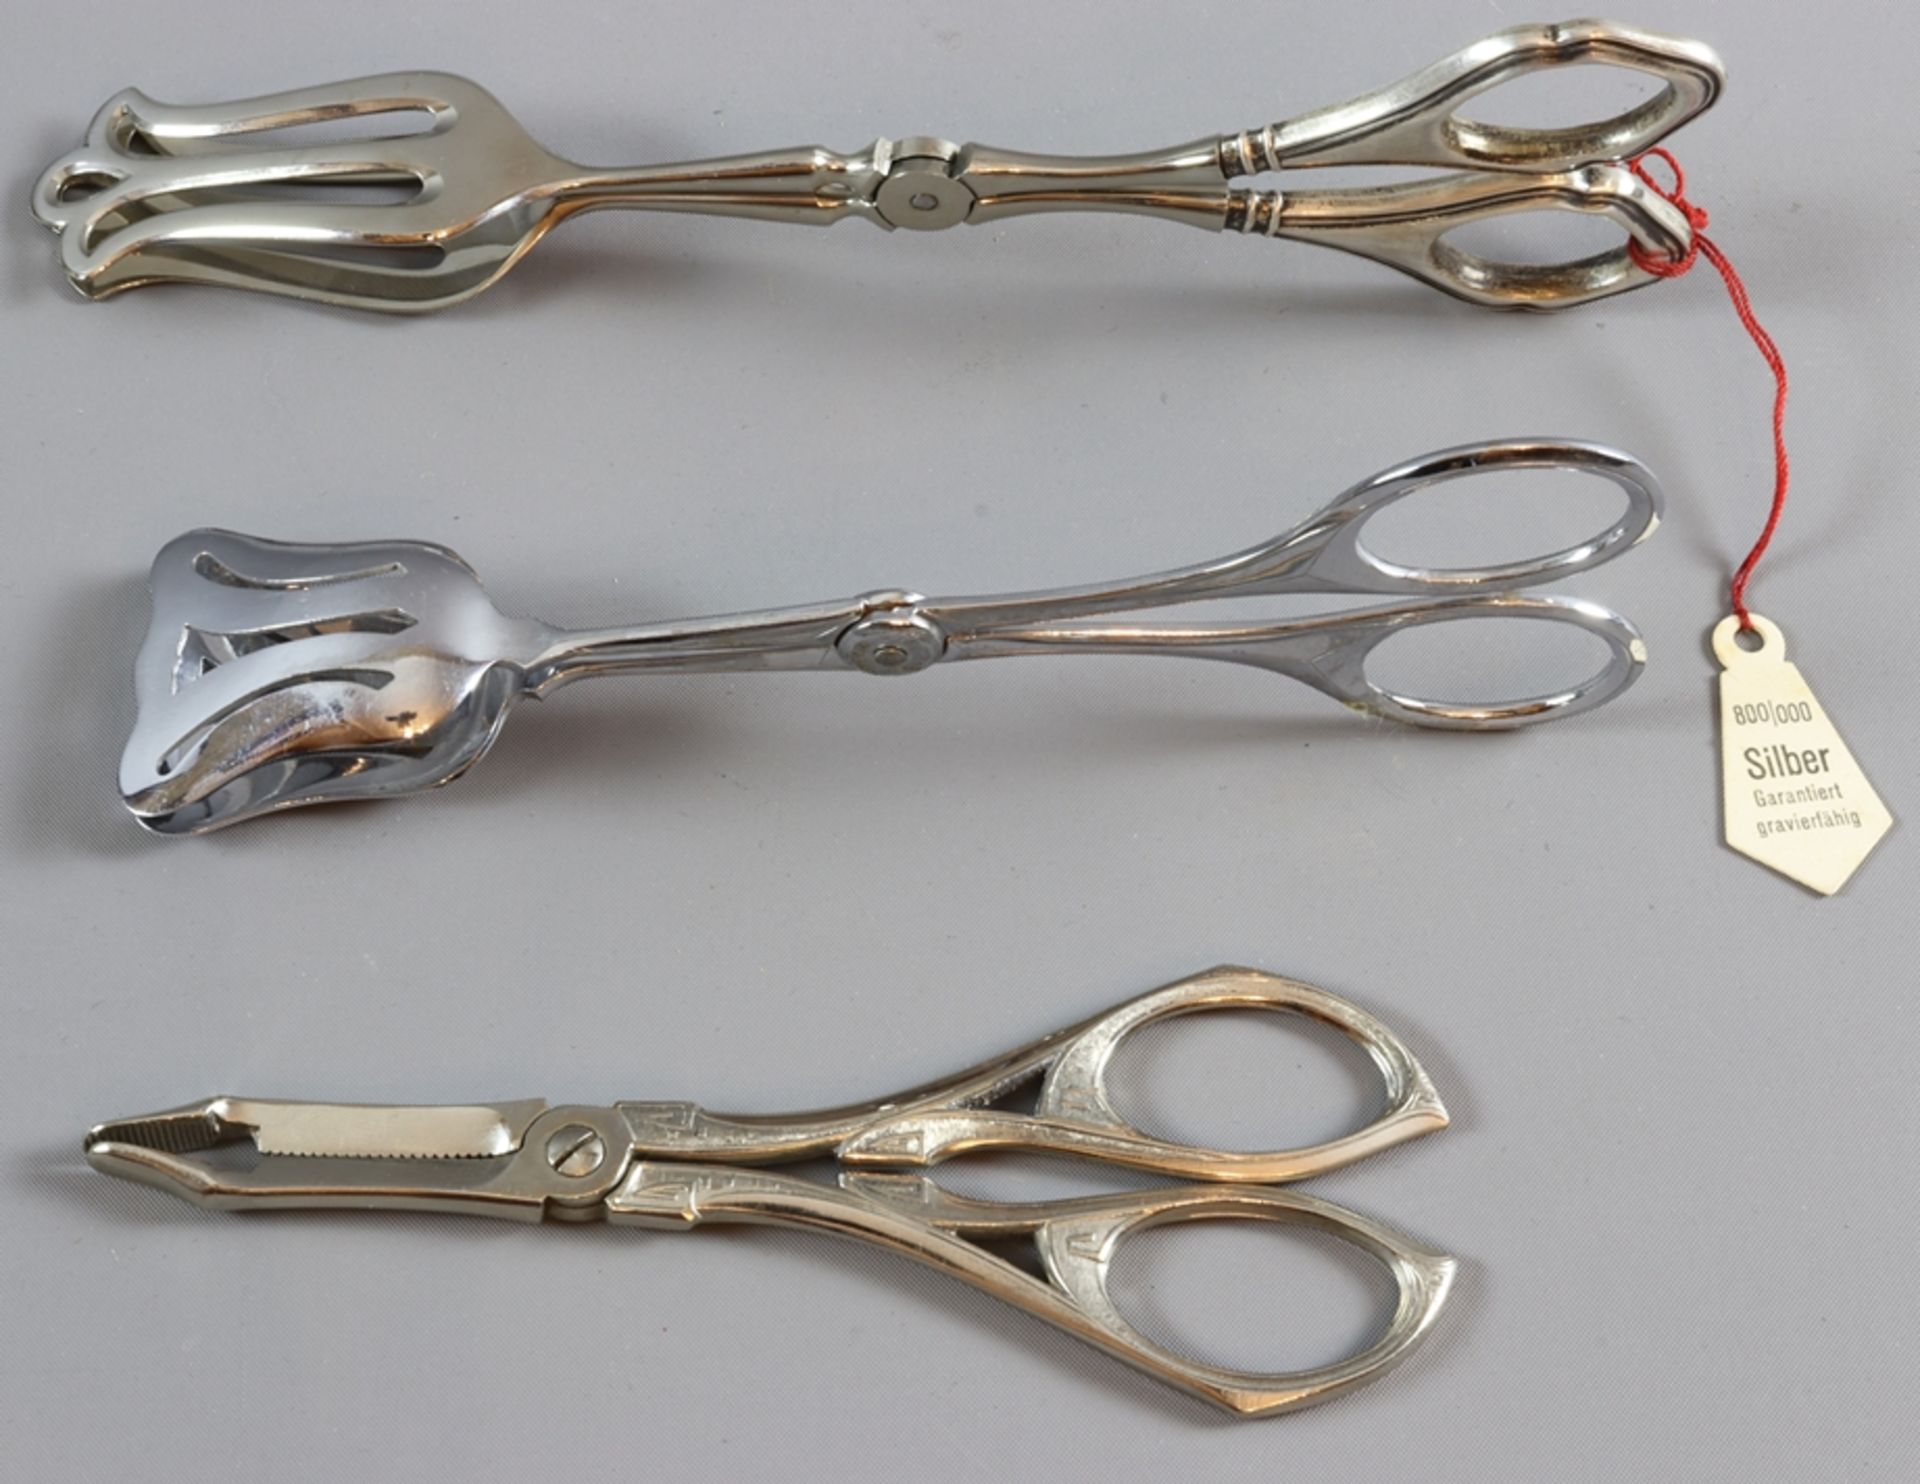 Silver pastry tongs and others, Historism 1900 - 1920, German - Image 2 of 3